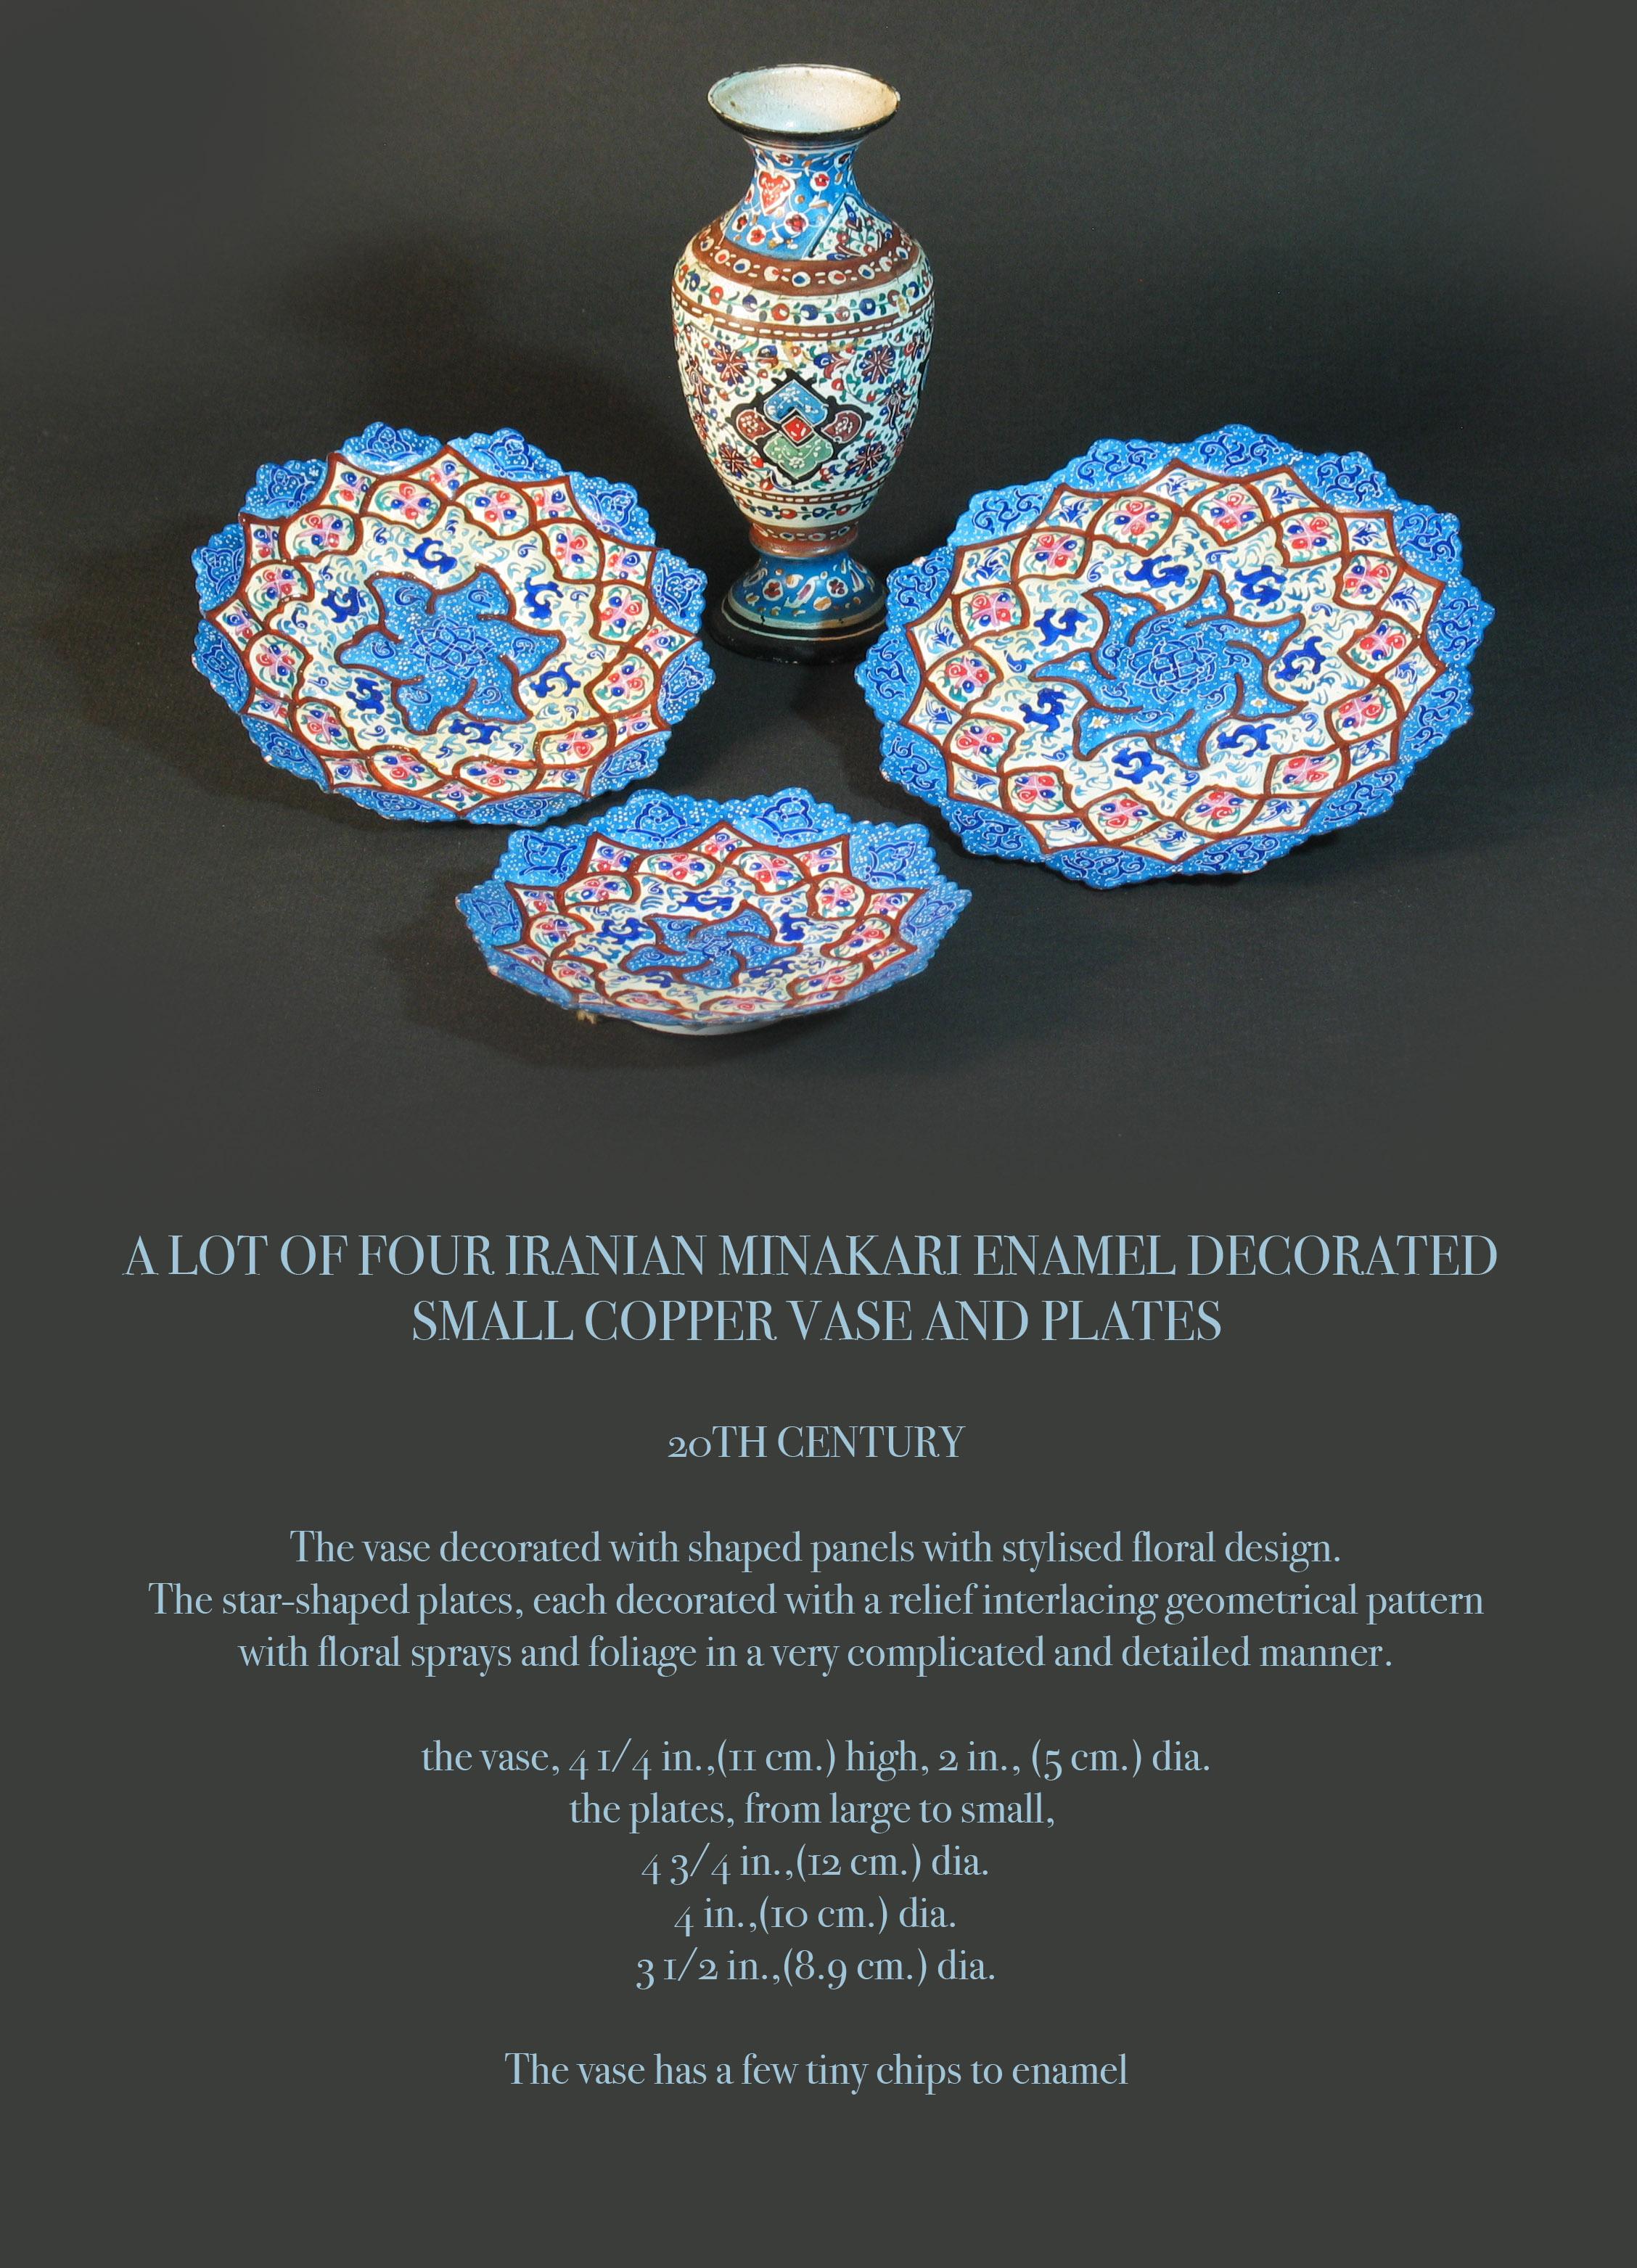 Lot of Four Iranian Minakari Enamel Decorated Small Copper Vase and Plates For Sale 1